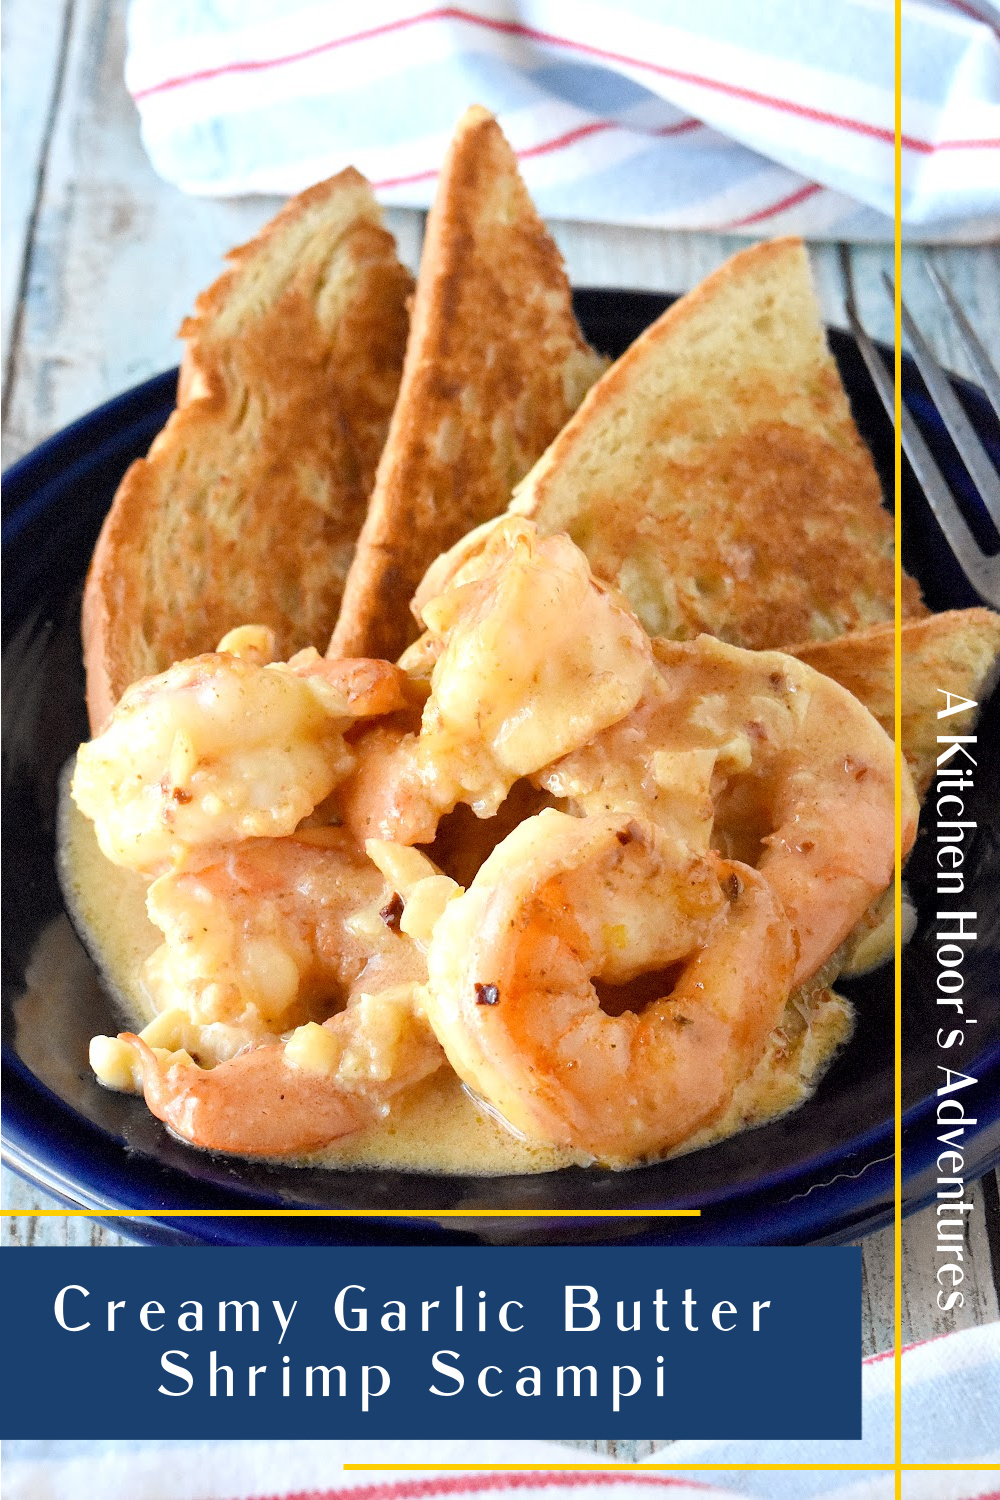 Satisfy Your Cravings with this Creamy Garlic Butter Shrimp Scampi